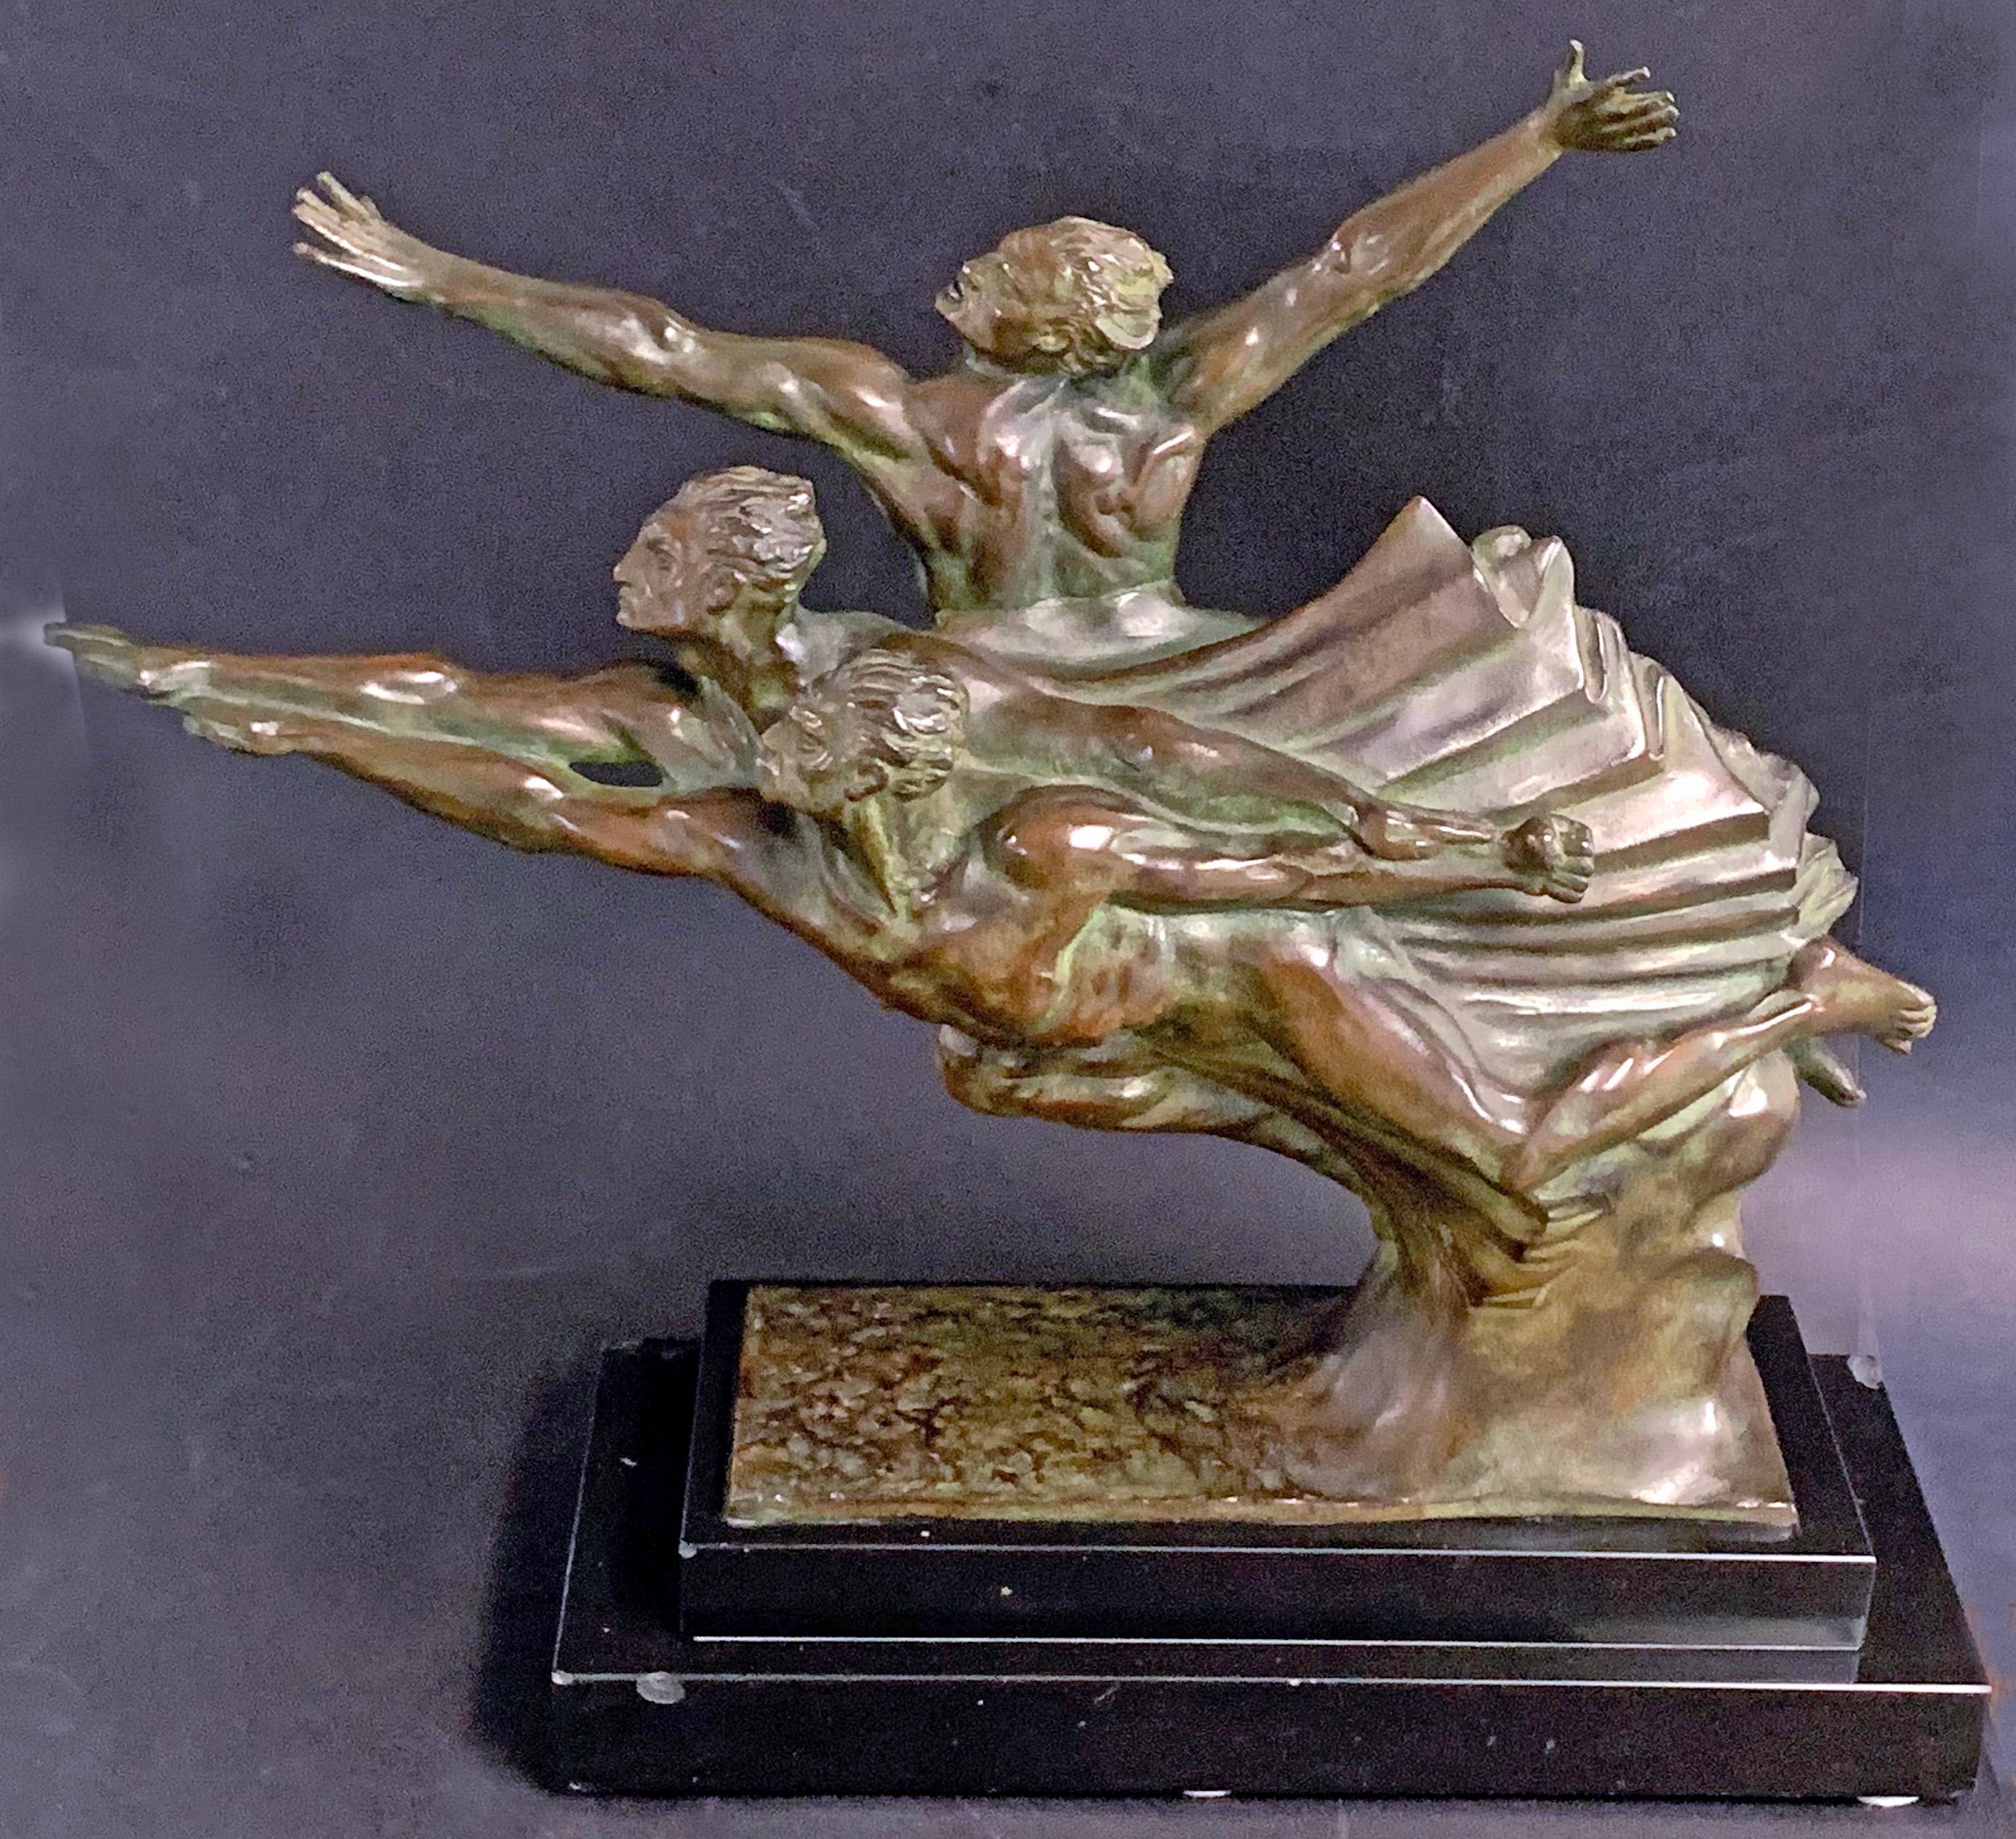 Large, rare and dramatic, this Art Deco bronze by Robert Delandre, circa 1930, depicts three nude male athletes all straining to reach the finish line of the race, their arms straining forward to win, and upward in ecstatic joy. The concentration